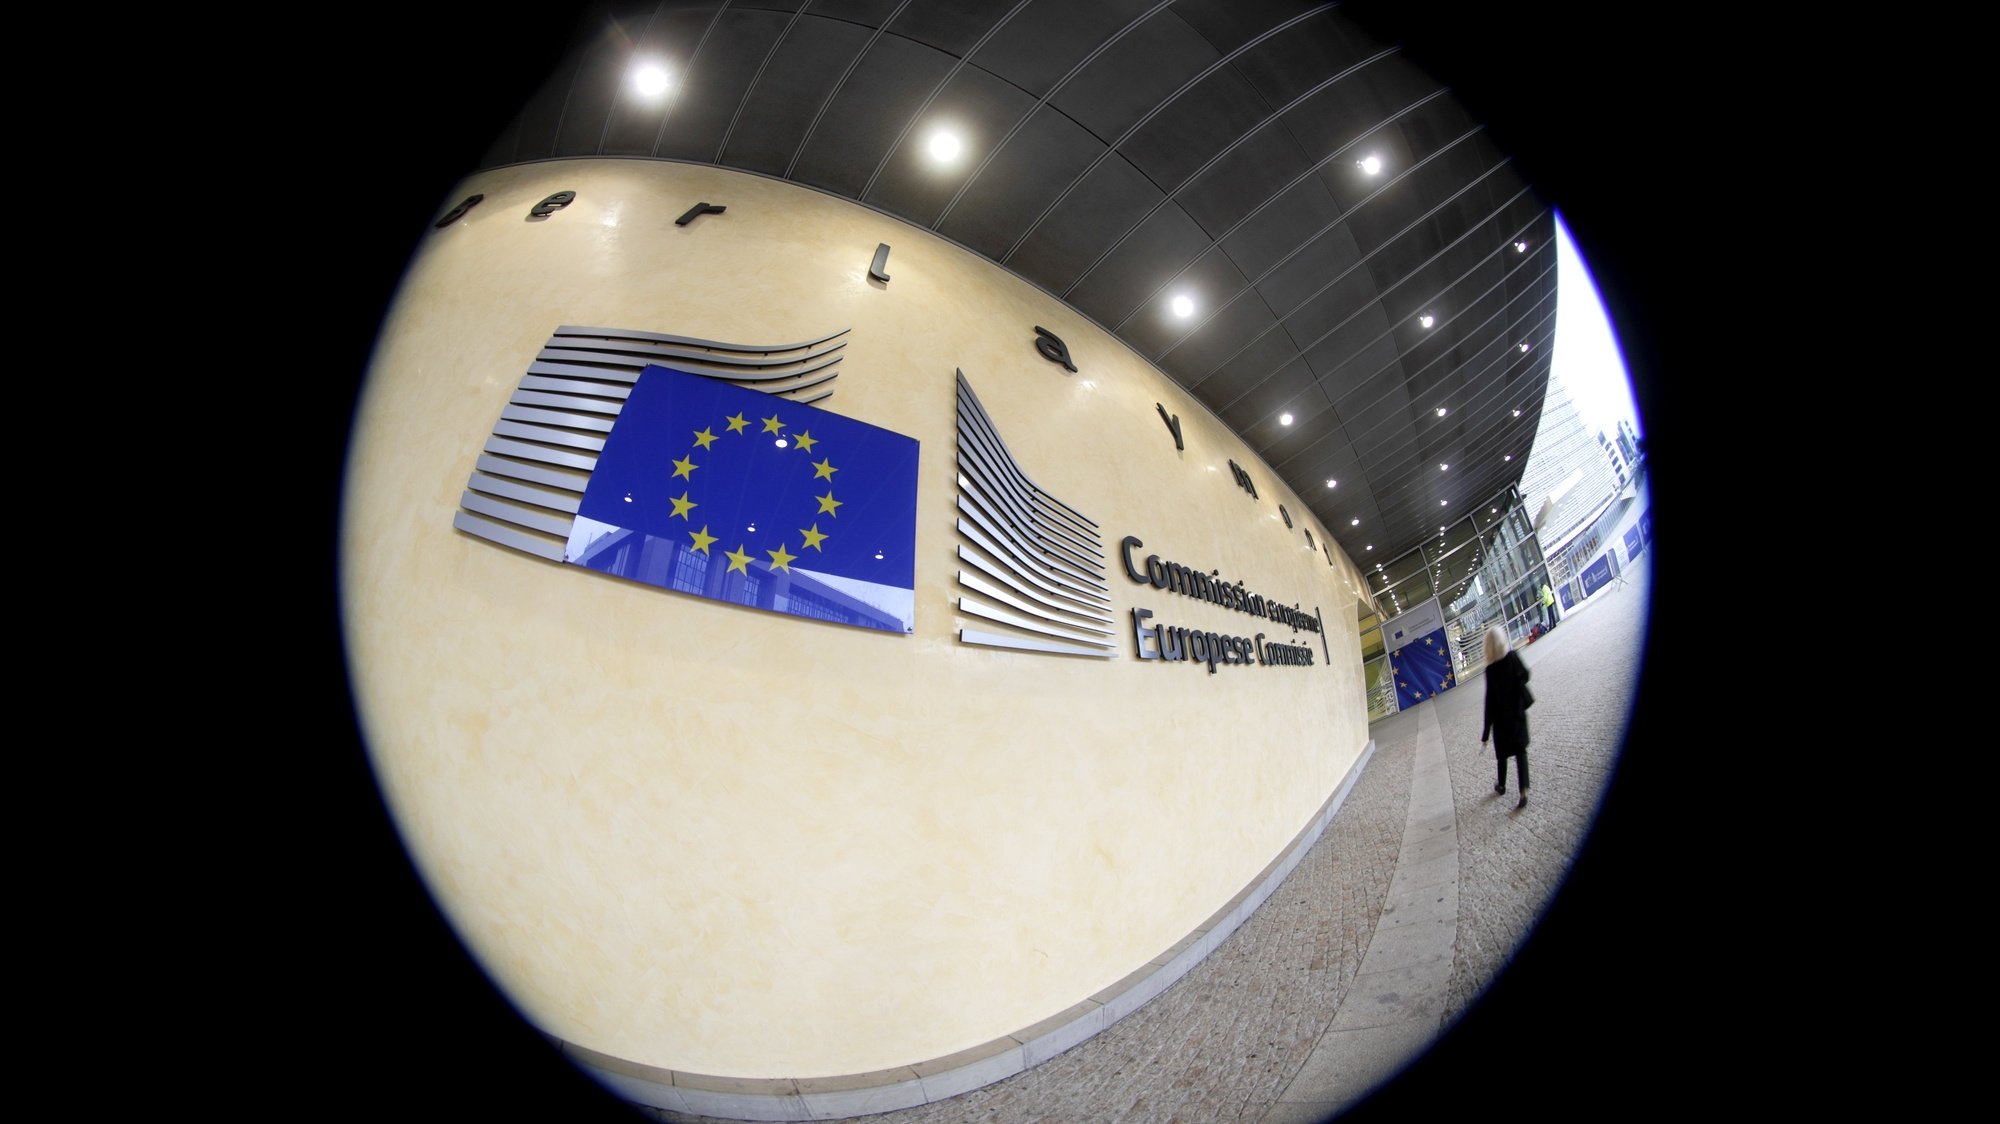 epa08026175 A photo taken with a fisheye lens shows the European Commission headquarters in Brussels, Belgium, 26 November 2019. President-Elect of the European Commission Ursula von der Leyen on 27 November 2019 will present her team of Commissioners-designate and the new Commission&#039;s programme to the European Parliament in Strasbourg, France. Members of the European Parliament (MEPs) will then discuss and decide (by simple majority) whether to elect the College of Commissioners or not.  EPA/OLIVIER HOSLET